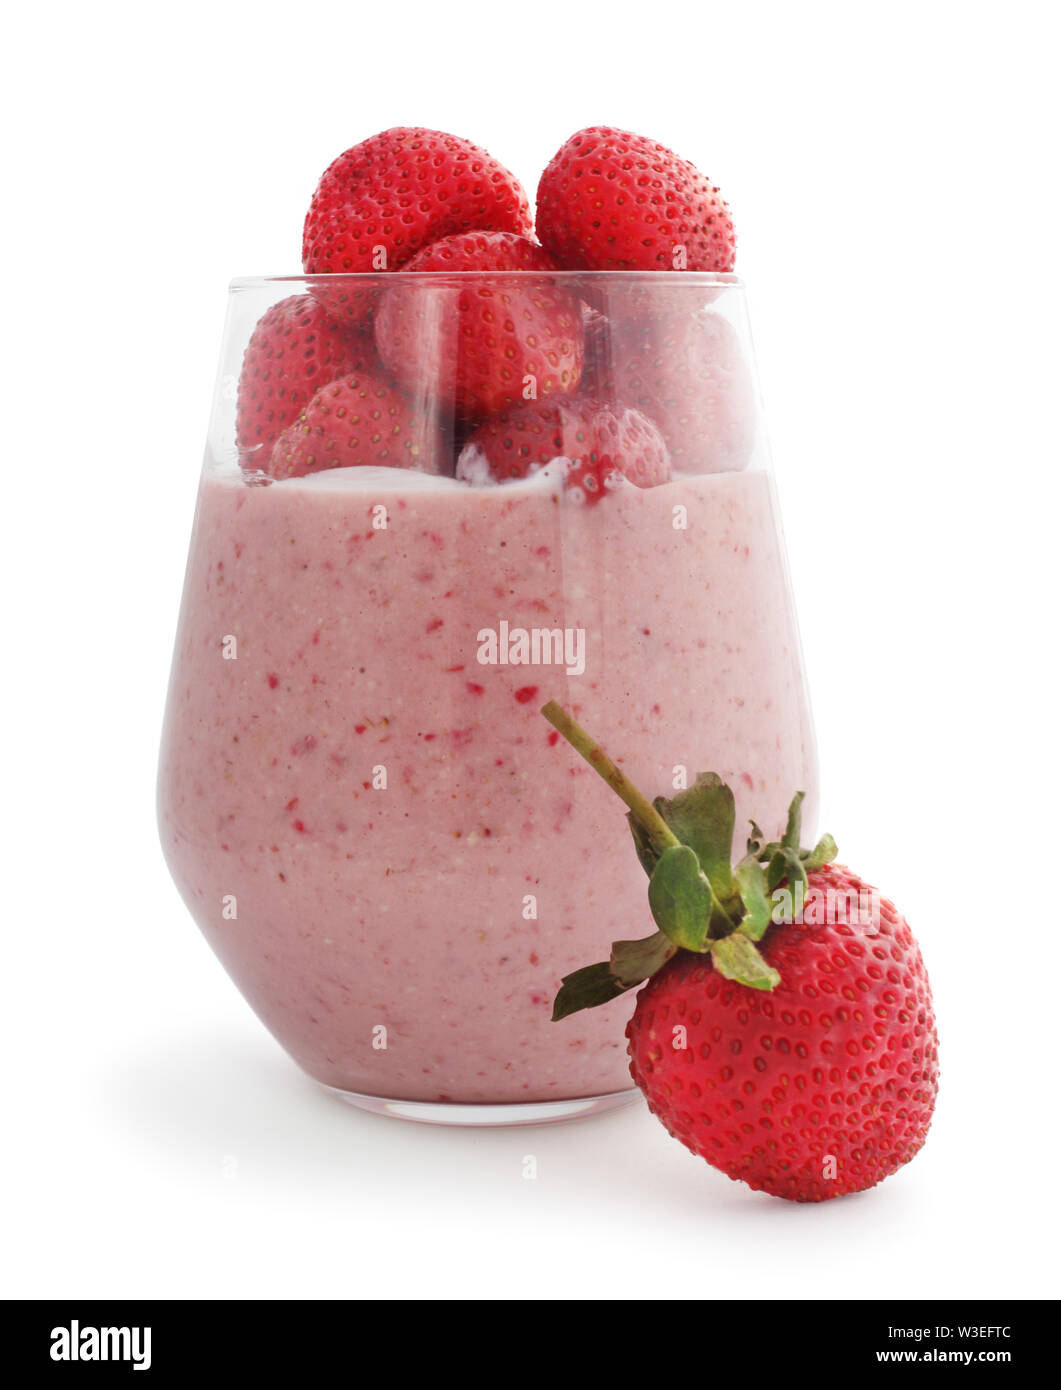 Smoothie and fresh berries strawberry studio isolated on white background Stock Photo